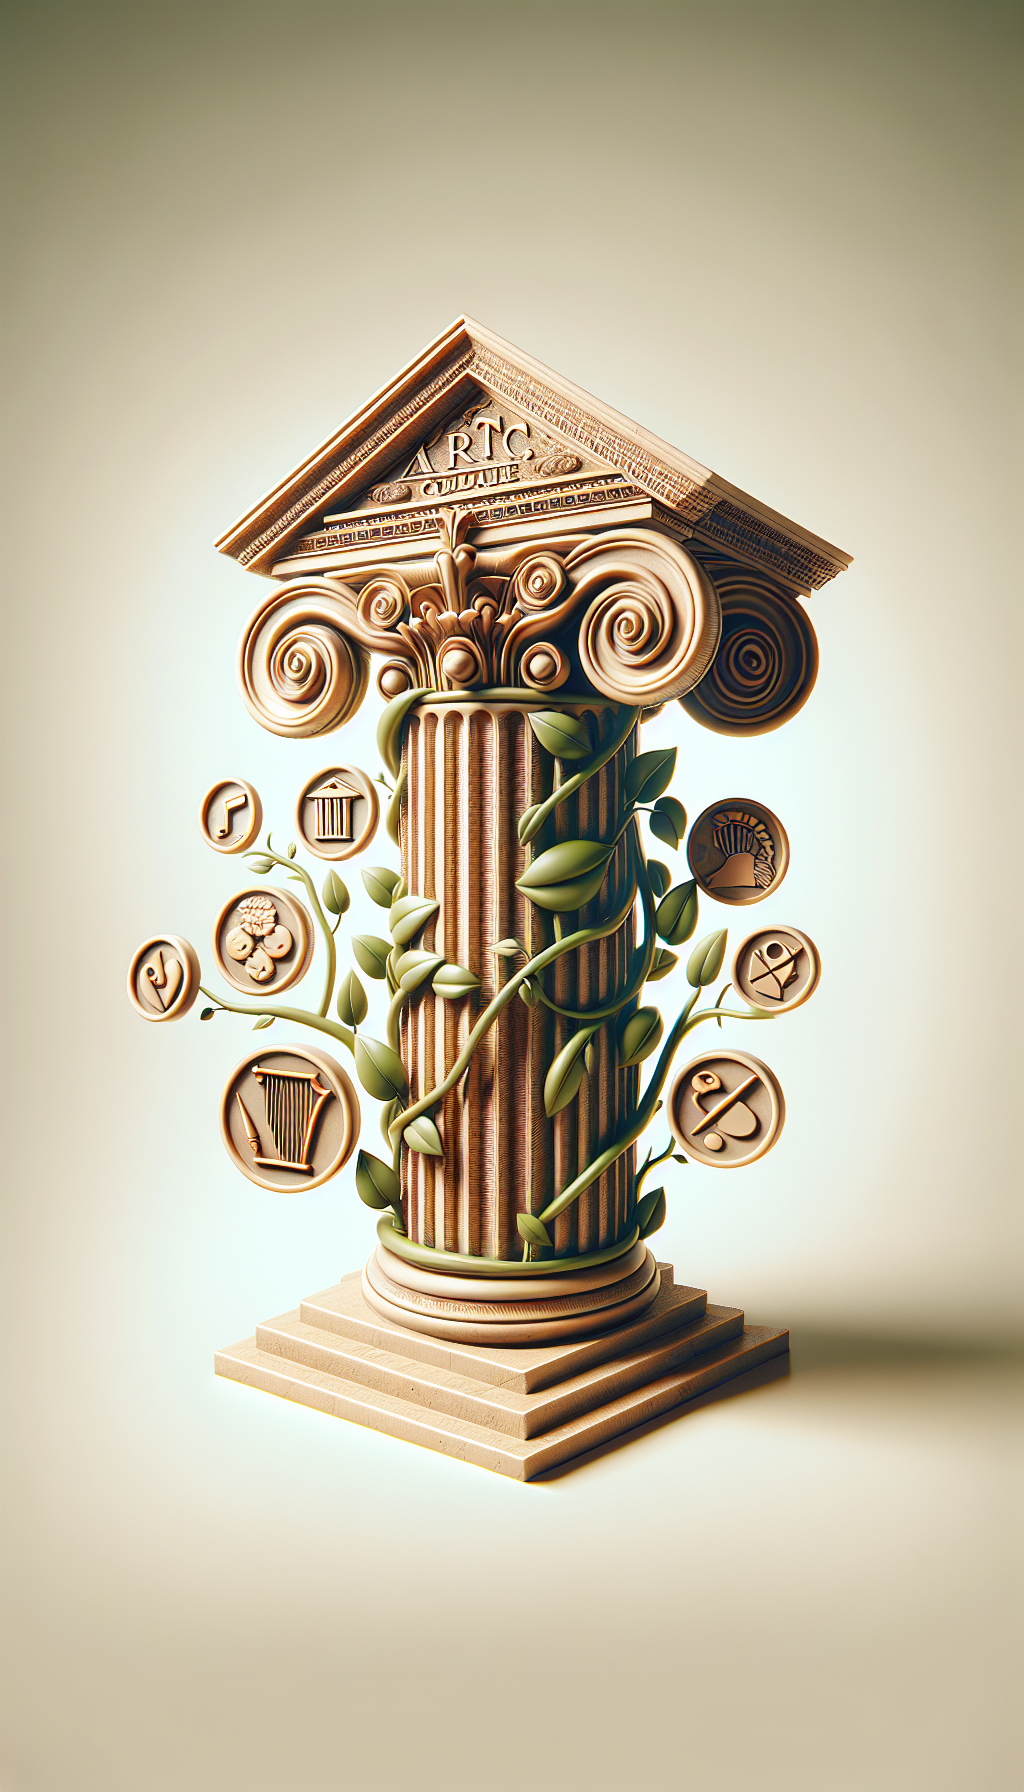 An opulent, ancient Greek column stands erect, entwined with a flourishing vine, its leaves subtly transitioning into diverse art icons—a palette, a lyre, a quill. Atop sits a timeless coin, embossed with 'Art' on one side and 'Culture' on the other, symbolizing the inherent, enduring value of the arts within the very pillars of civilization.